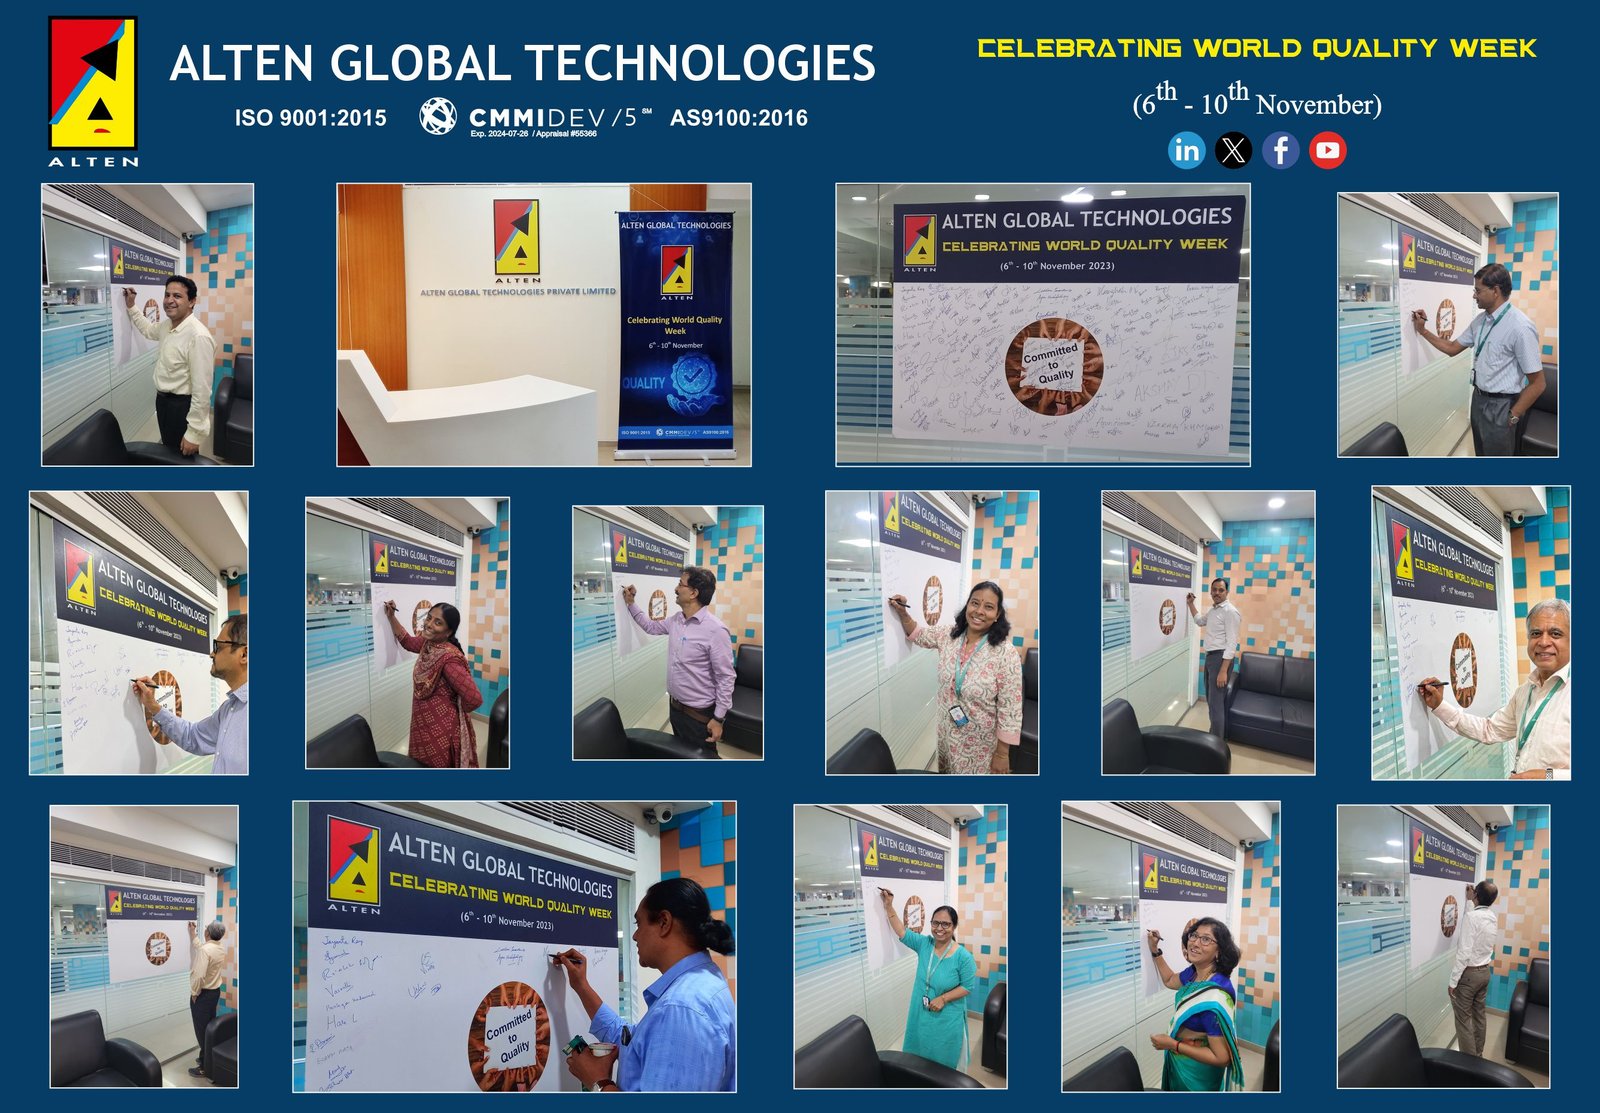 Quality_week_at_ALTEN_GLOBAL_TECHNOLOGIES